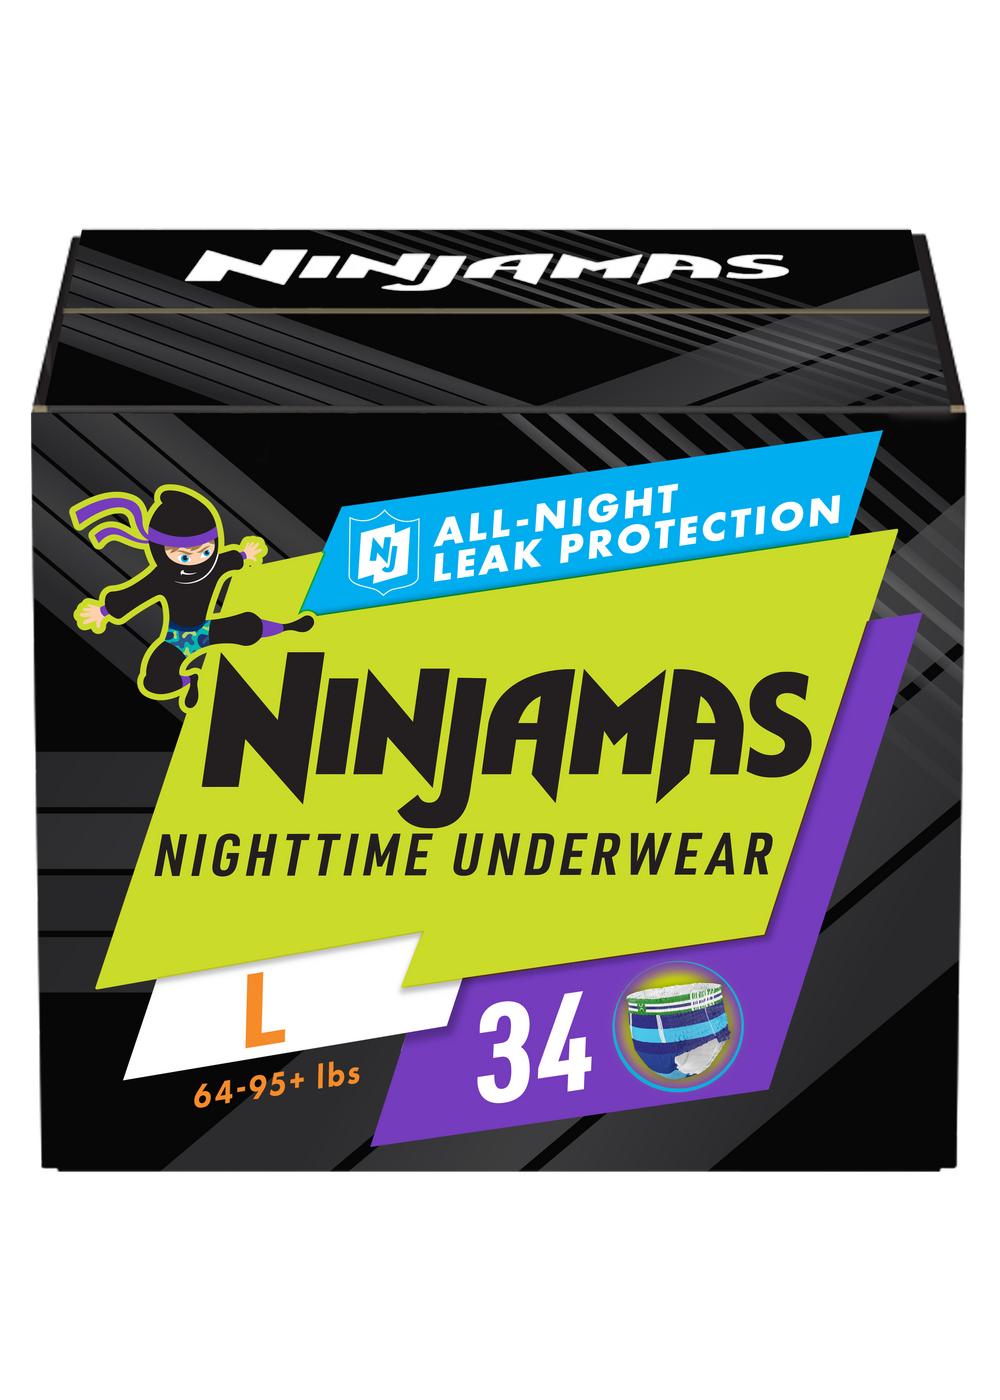 Goodnites Overnight Underwear for Boys - XS - Shop Training Pants at H-E-B